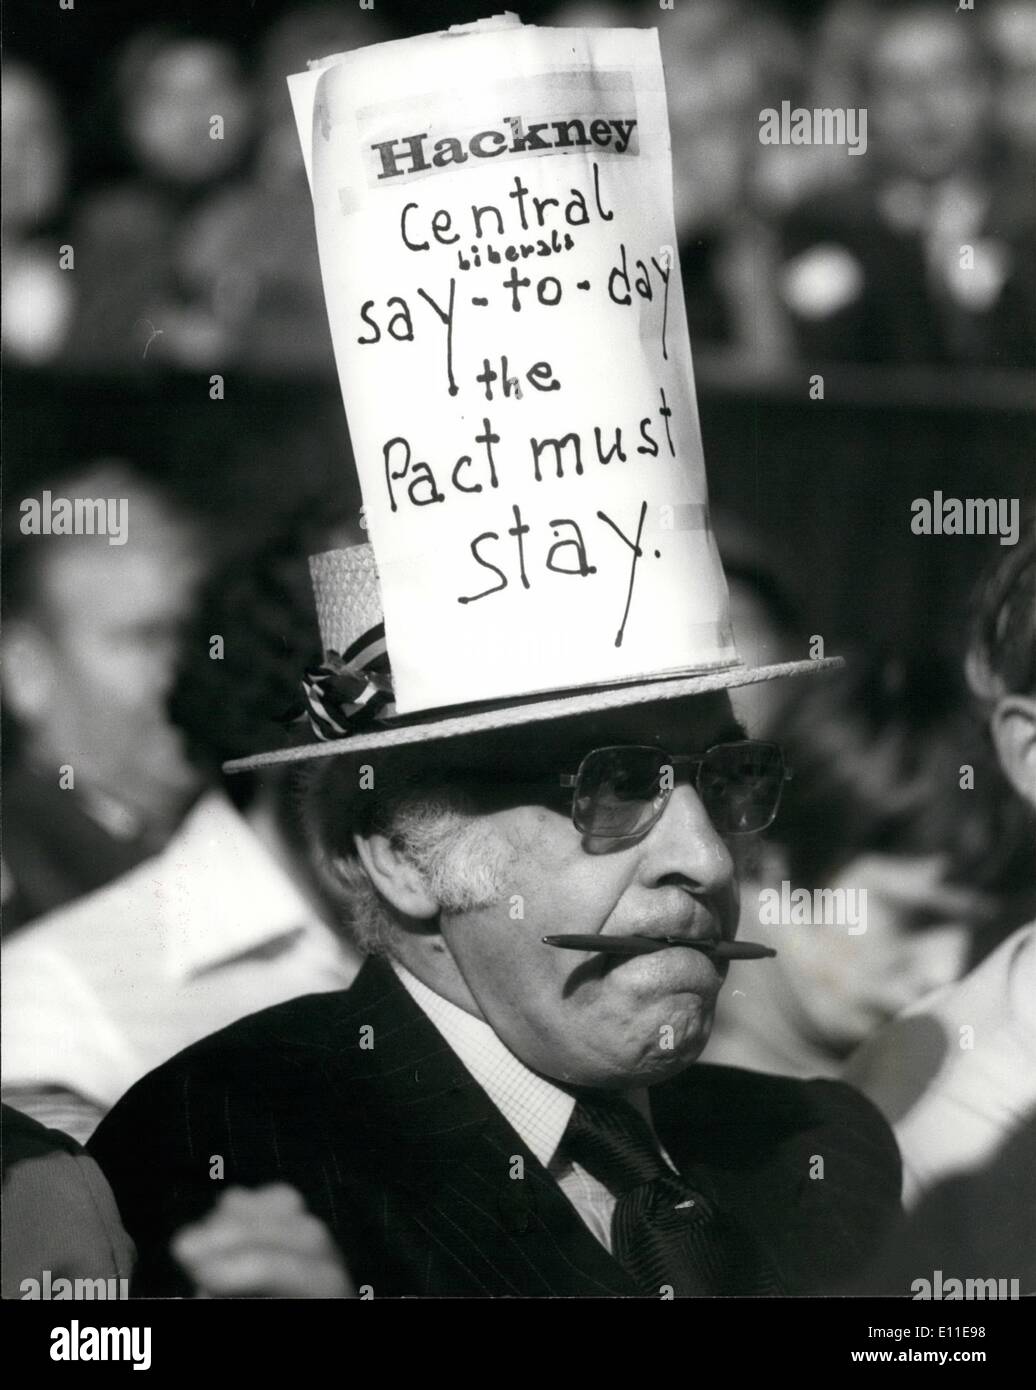 Sep. 09, 1977 - Liberal party conference at brighton.: Liberal Leader David Steel is expecting a large vote in favour of his pact with the Labour Government from the Party rank and file during the Liberal Party Conference at Brighton today. Photo shows a delegate wearing a large top hat with 'The pact must stay' written on it during the Liberal Part Conference at Brighton today. Stock Photo